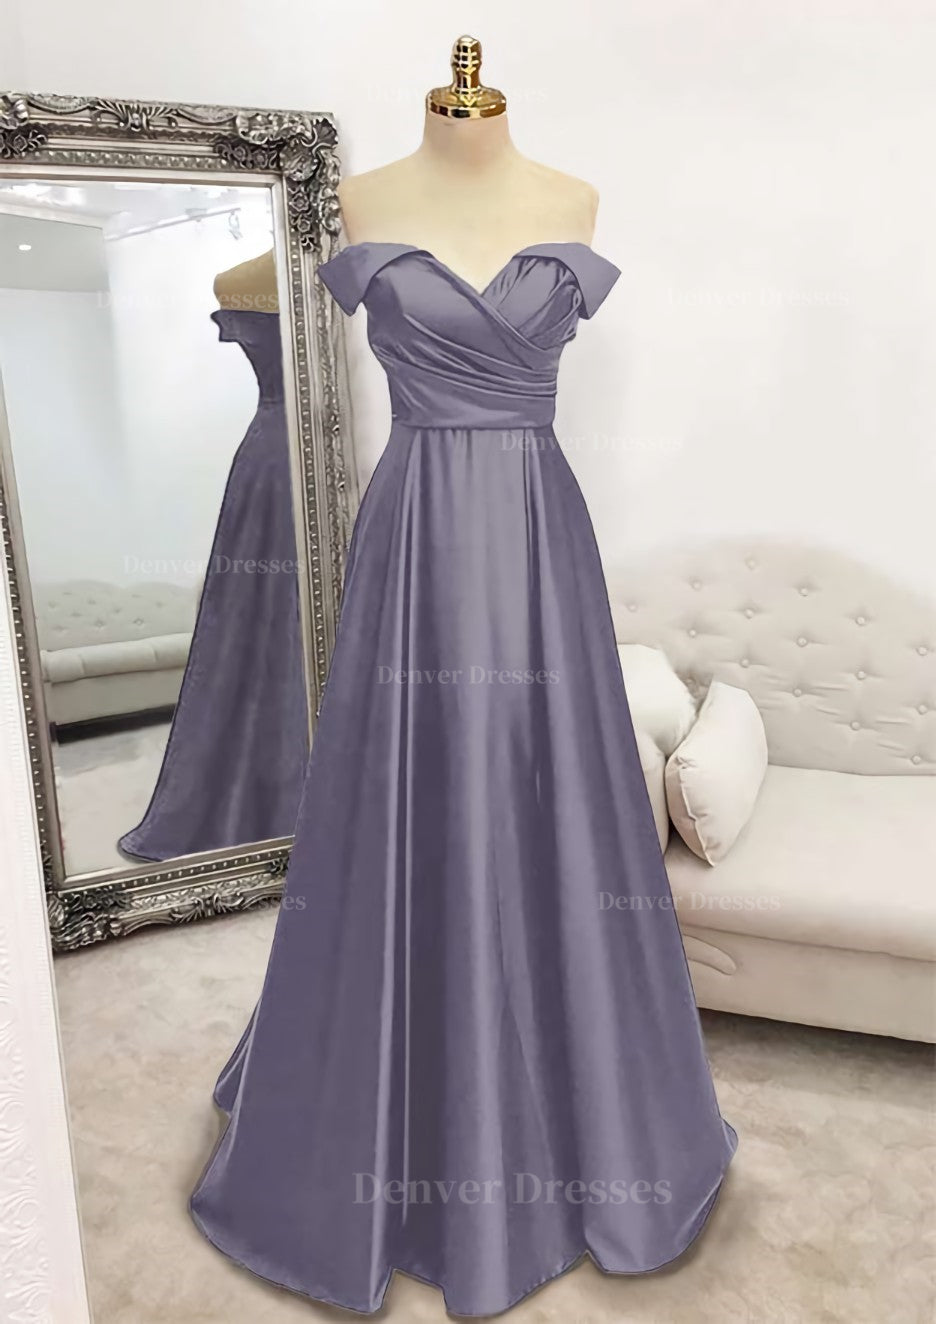 Flowy Dress, A-line Off-the-Shoulder Sleeveless Long/Floor-Length Satin Prom Dress With Pleated